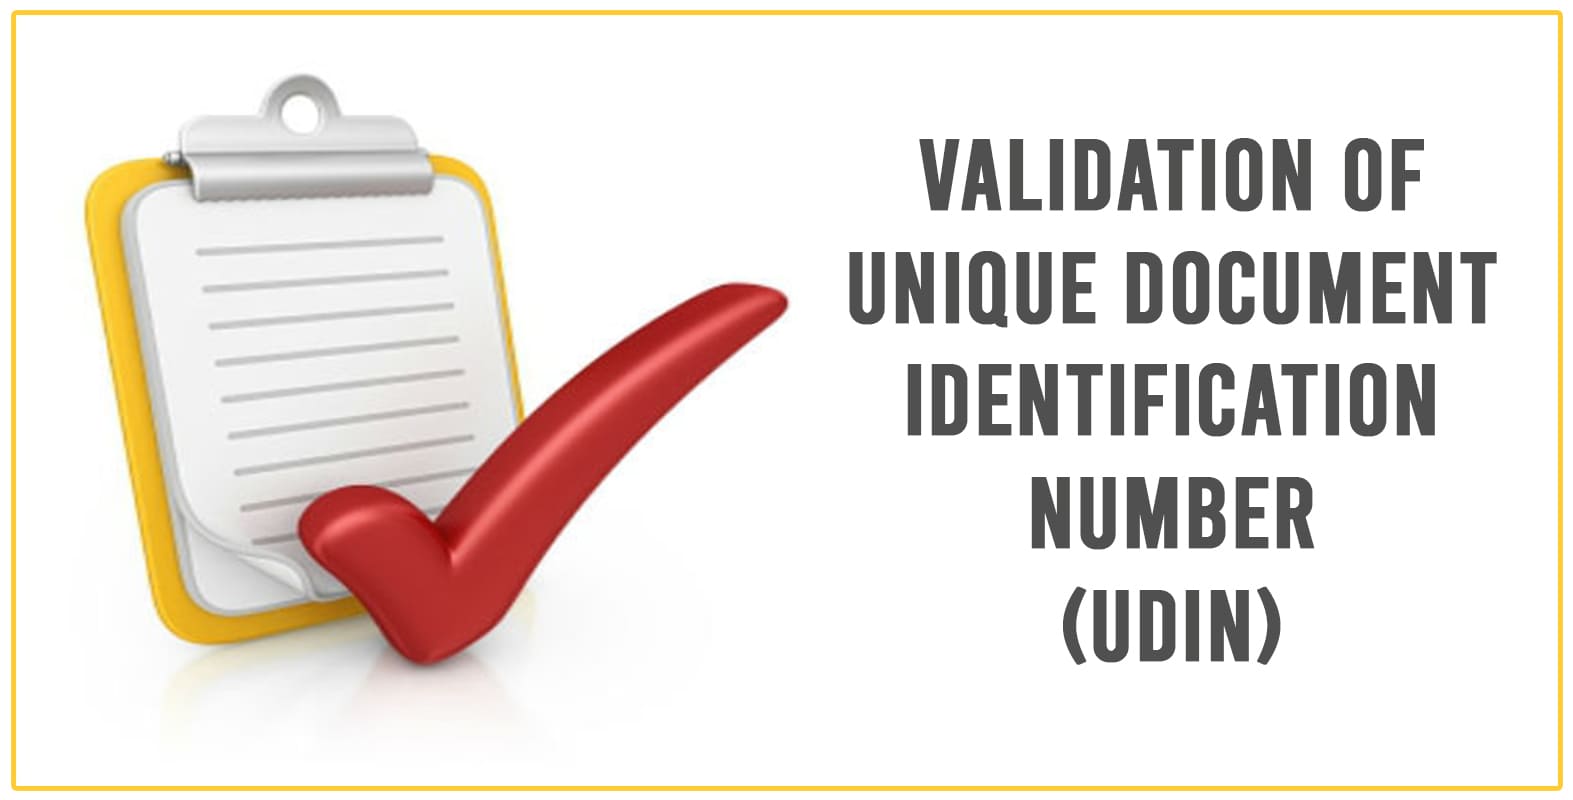 Validation of Unique Document Identification Number (UDIN) by ICAI portal during Tax Audit Reports